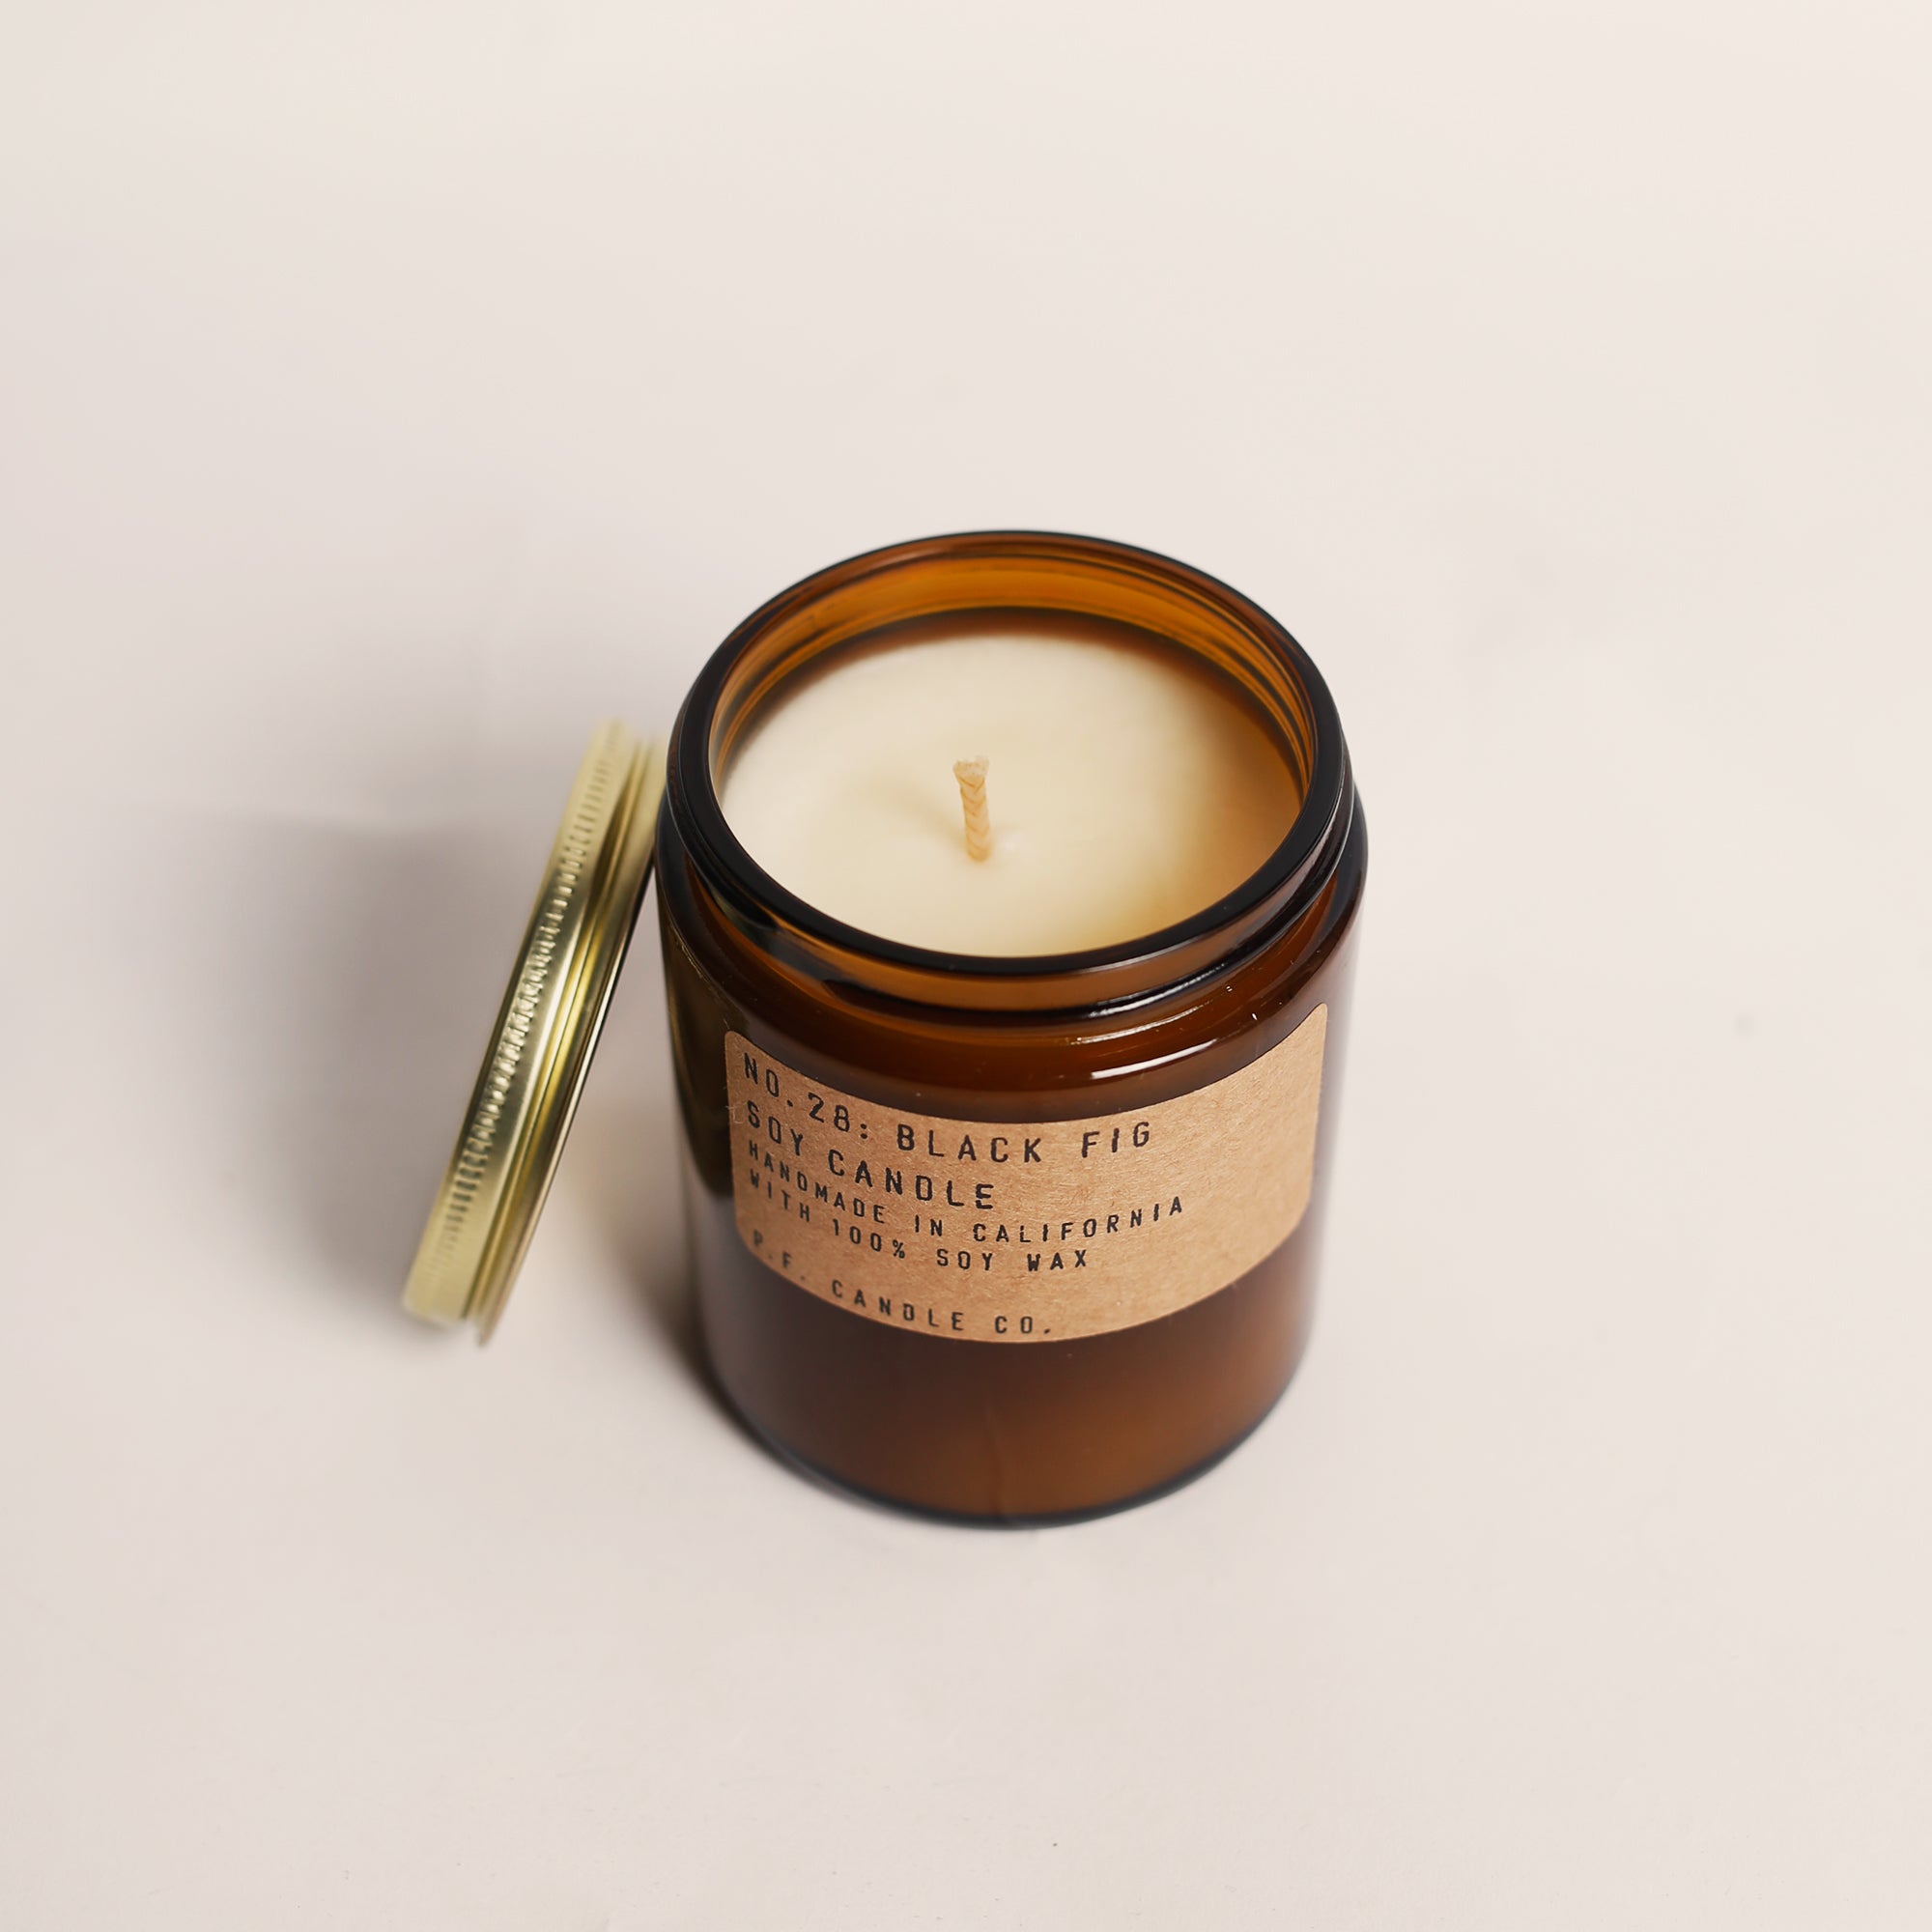 P.F Candle Co. - Candle - Black Fig